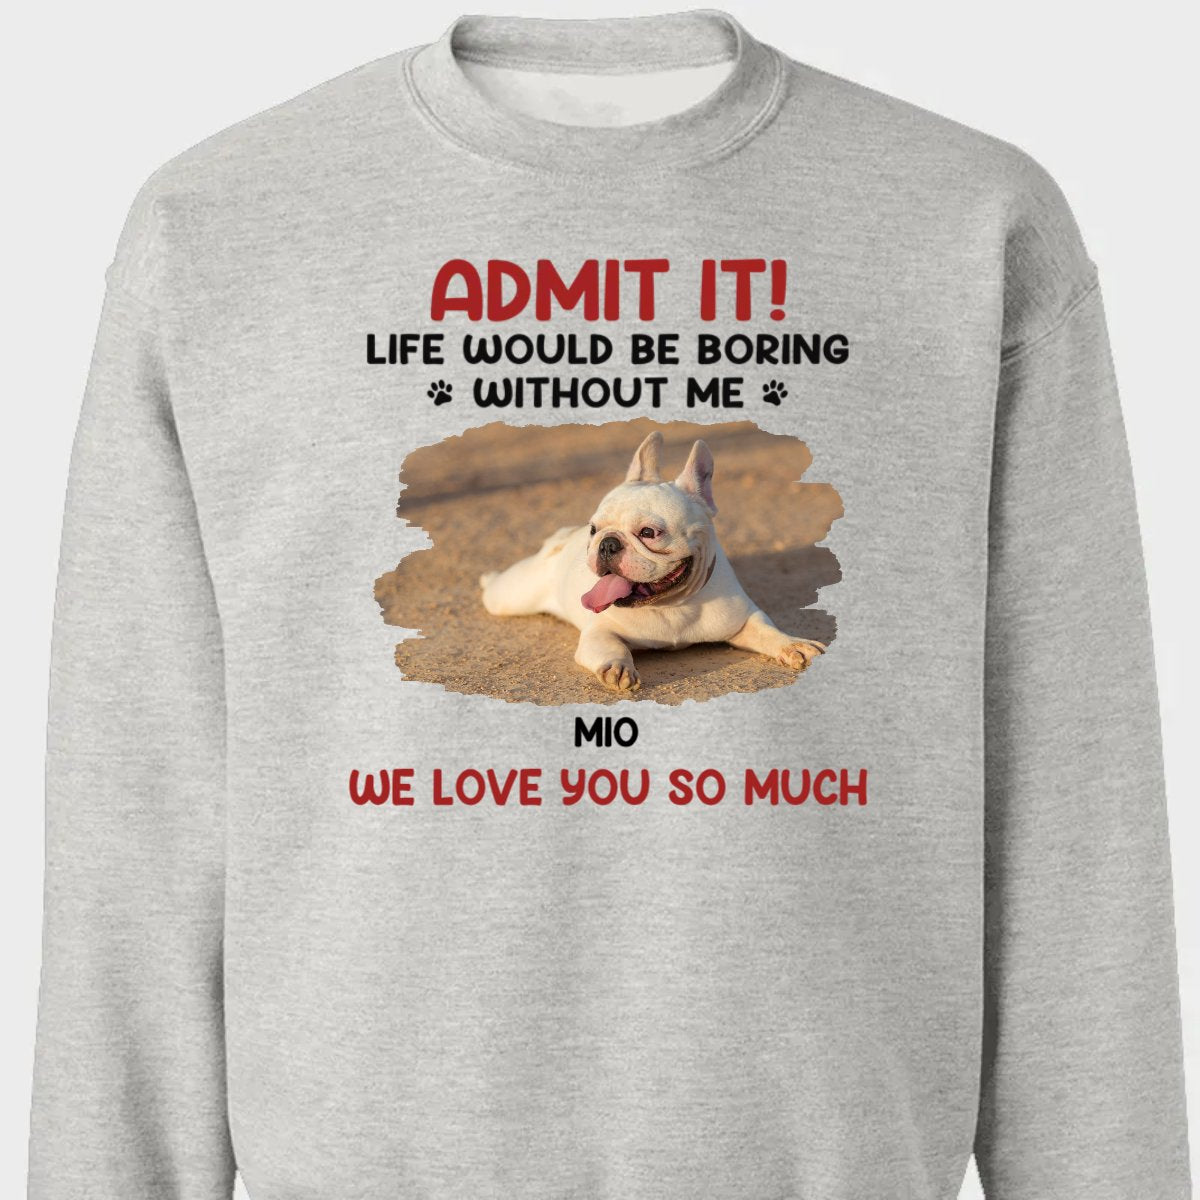 Pet Lovers - Custom Photo Life Would Be Boring Without Me - Personalized T - shirt, Hoodie, Sweatshirt - The Next Custom Gift